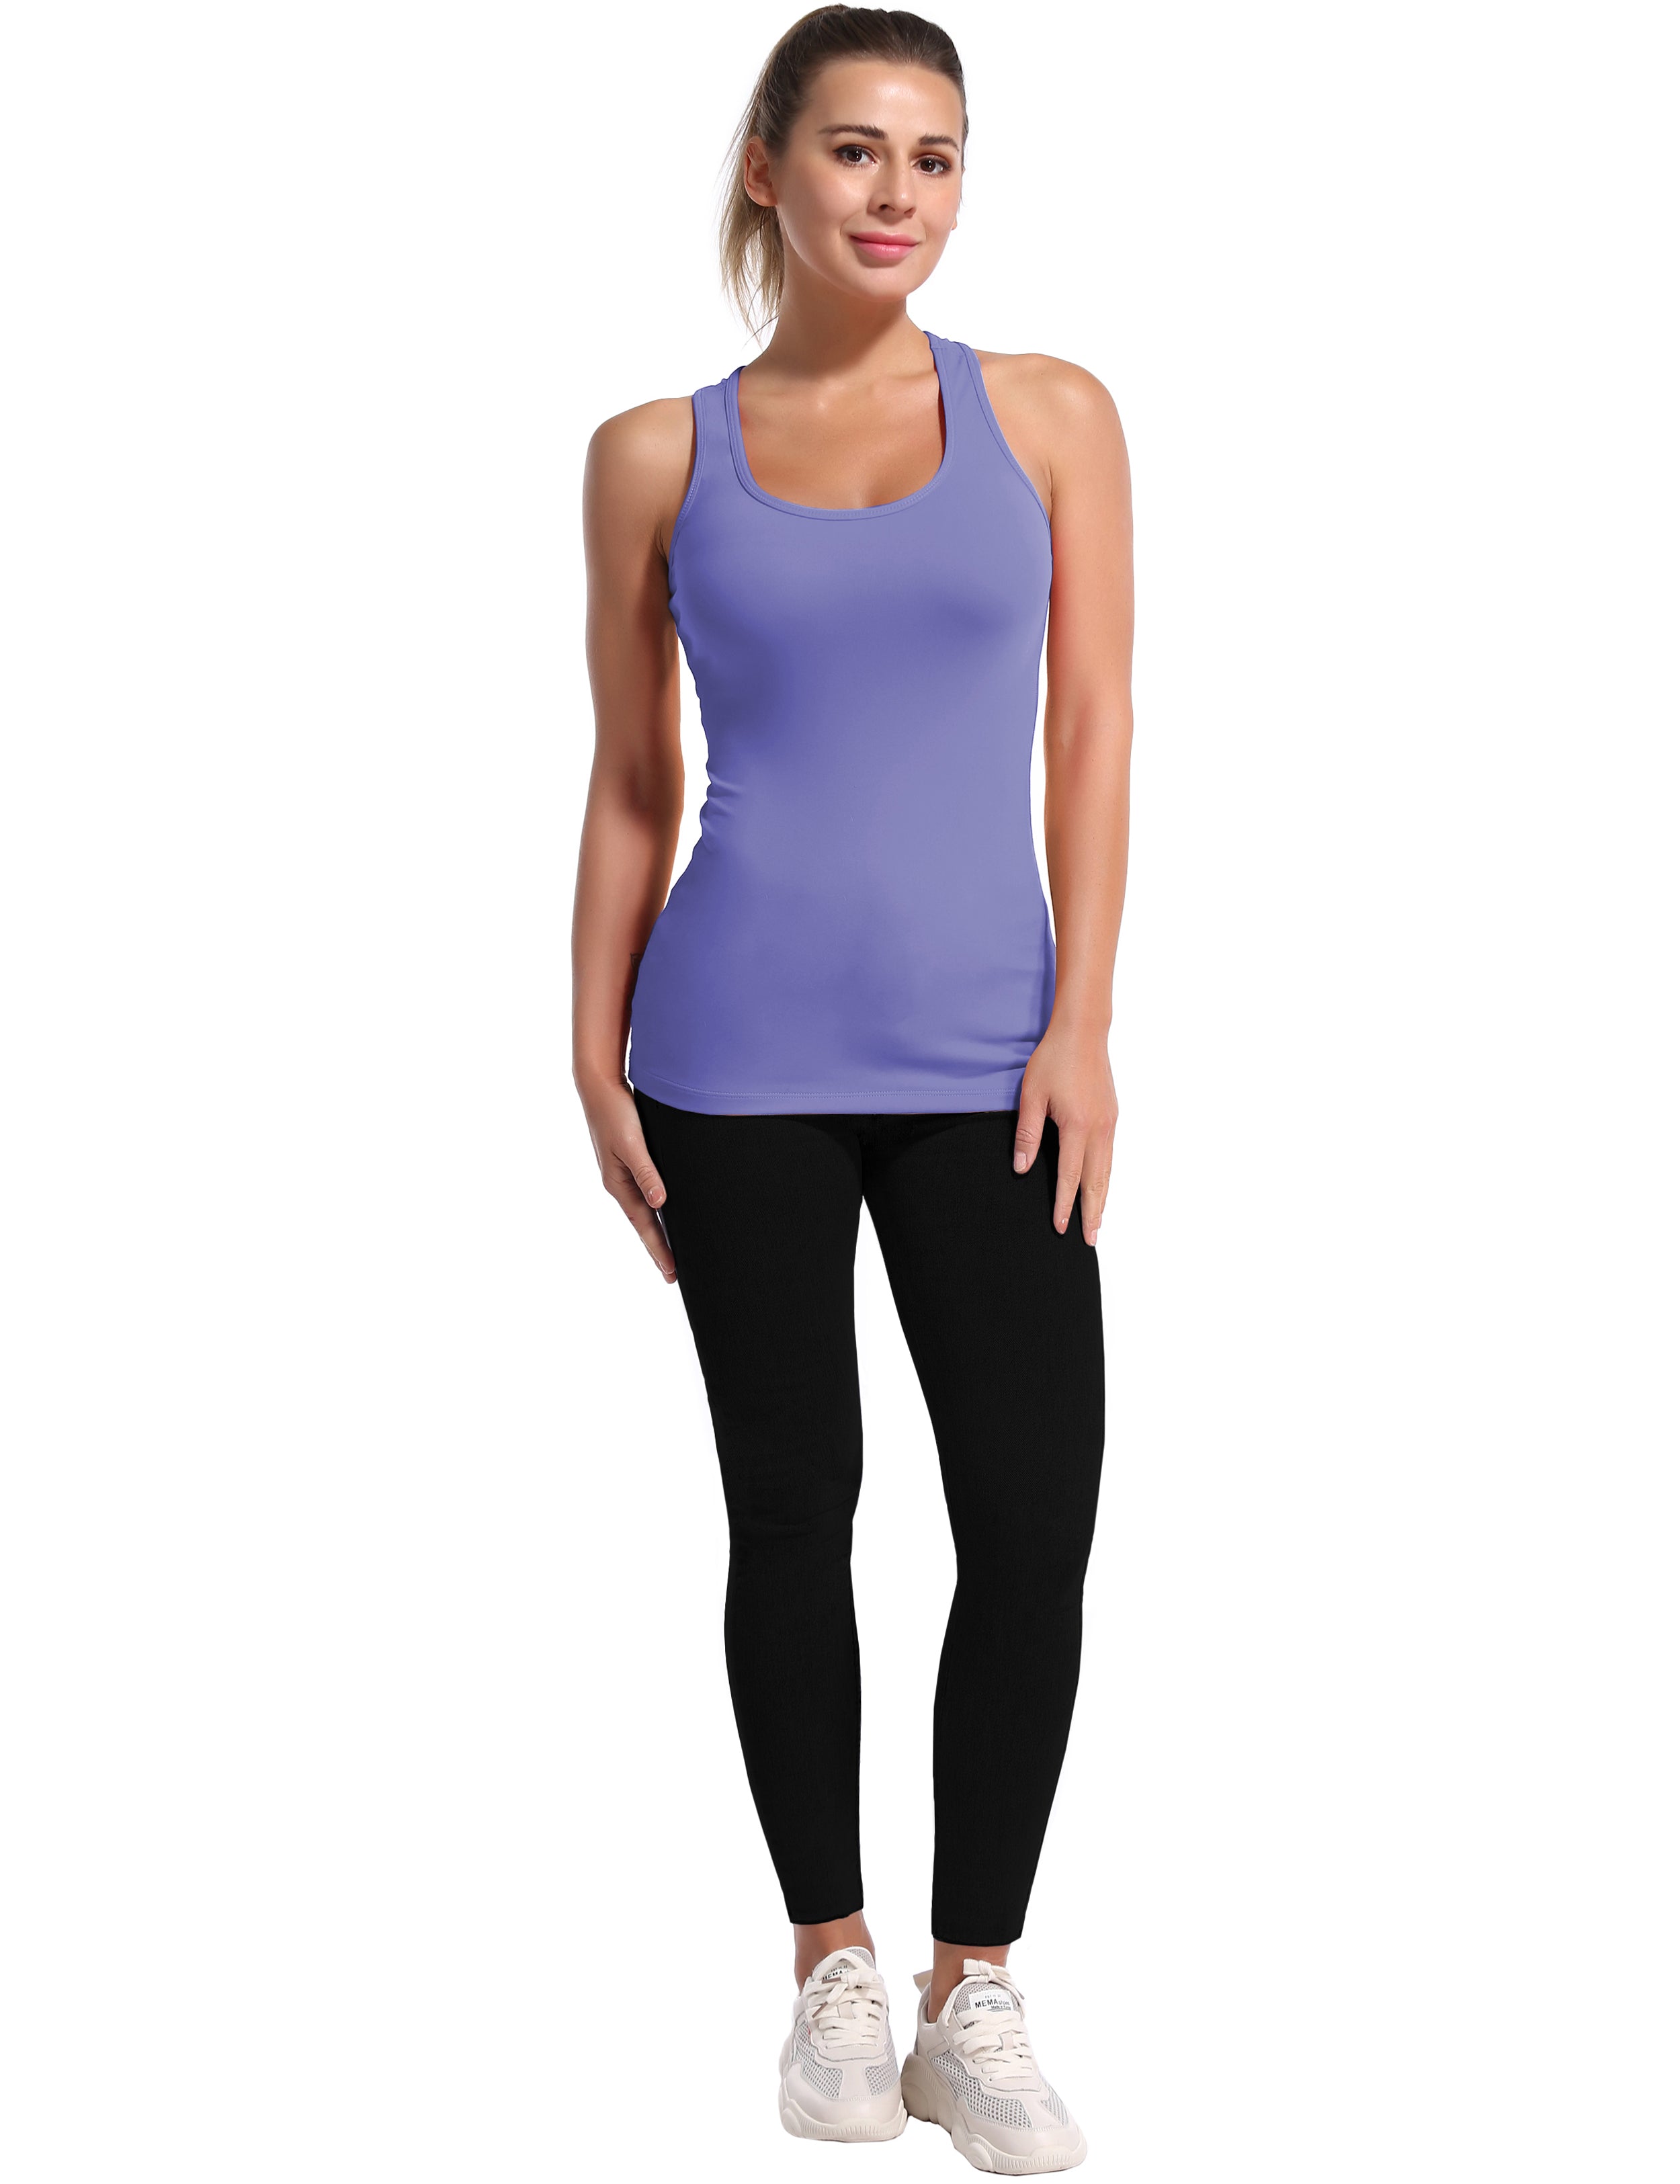 Racerback Athletic Tank Tops lavender 92%Nylon/8%Spandex(Cotton Soft) Designed for Yoga Tight Fit So buttery soft, it feels weightless Sweat-wicking Four-way stretch Breathable Contours your body Sits below the waistband for moderate, everyday coverage